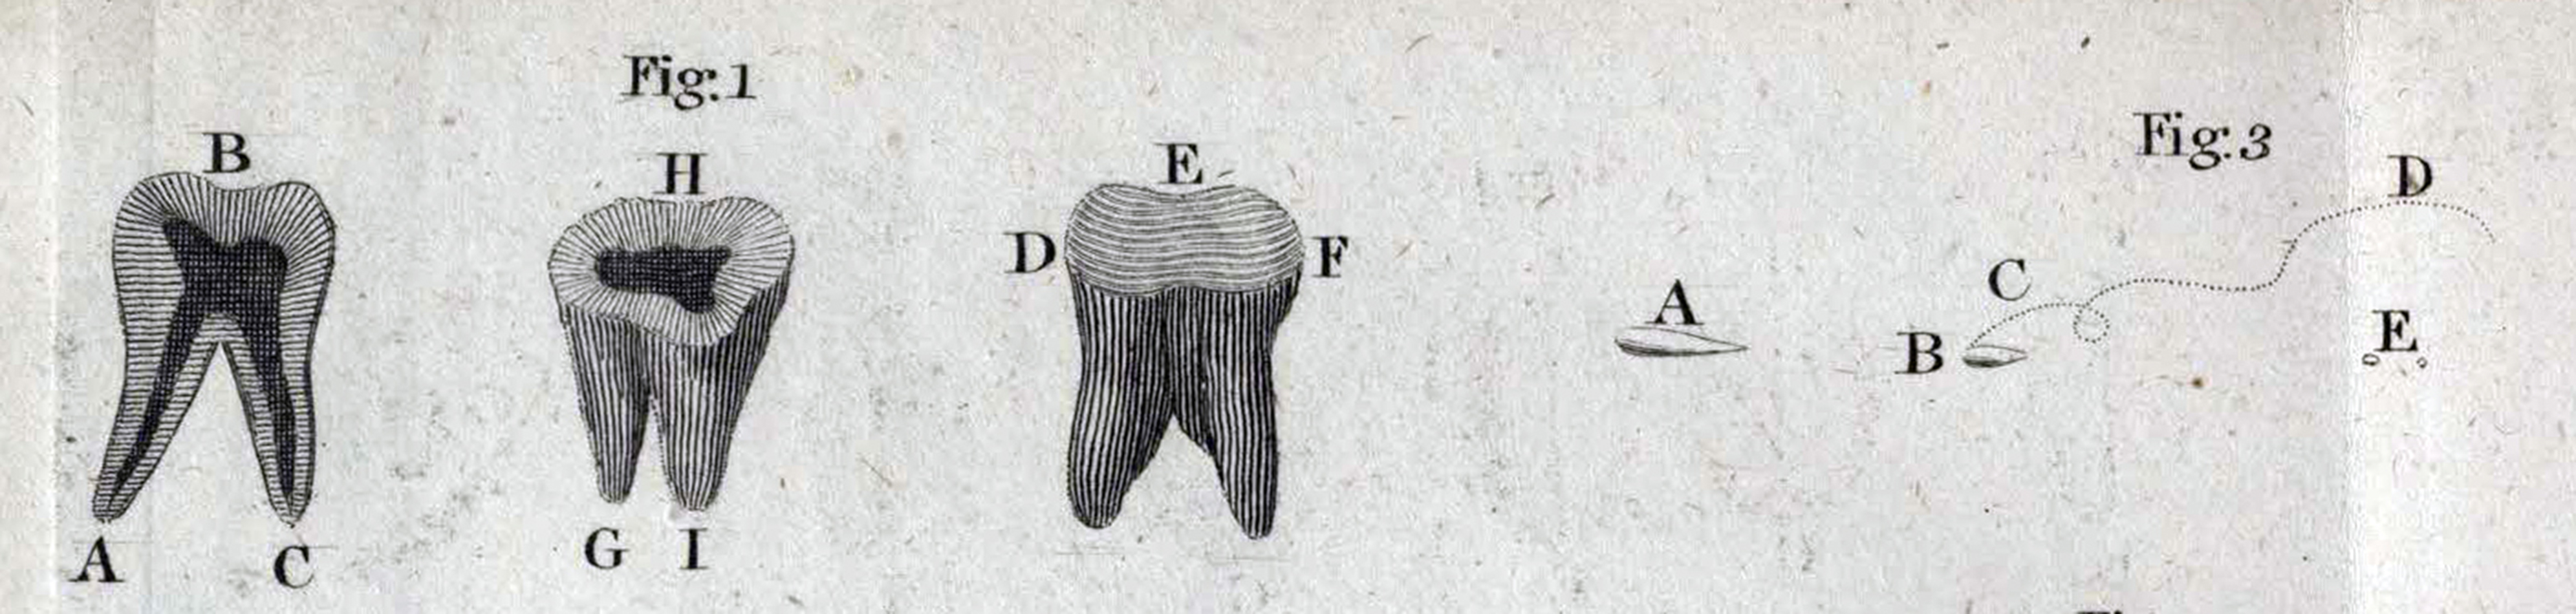 Detail from Plate V sQH271.L2H7 showing a whole human molar tooth (Fig. 1 A-I) and the 3 types of ‘animalcule’ observed in the sample scraped from Leeuwenhoek’s teeth (Fig. 3 A, B and E, with the ‘whirling’ motion of type B indicated by the dotted line at C and D).